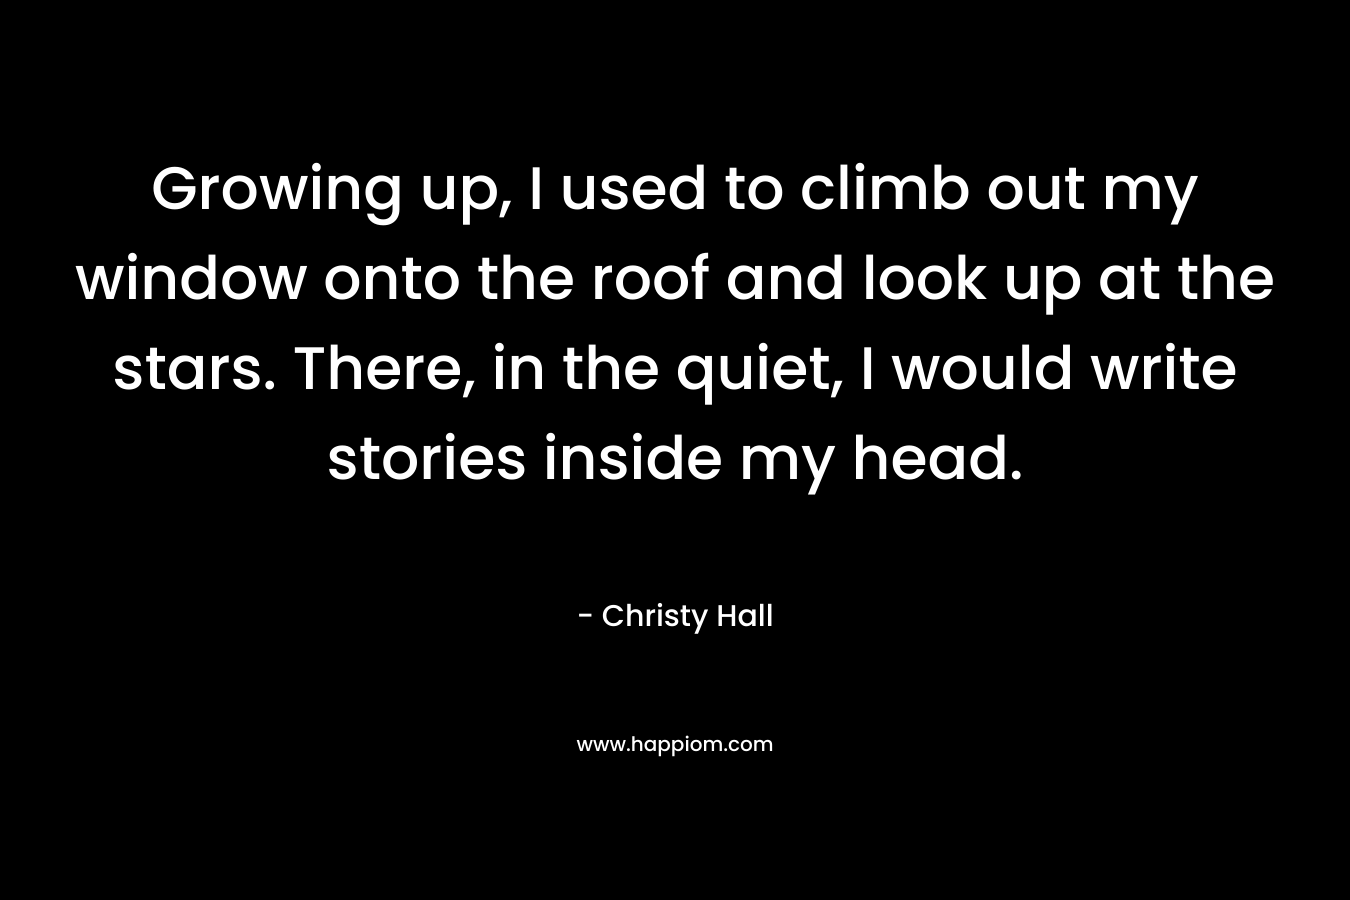 Growing up, I used to climb out my window onto the roof and look up at the stars. There, in the quiet, I would write stories inside my head. – Christy  Hall